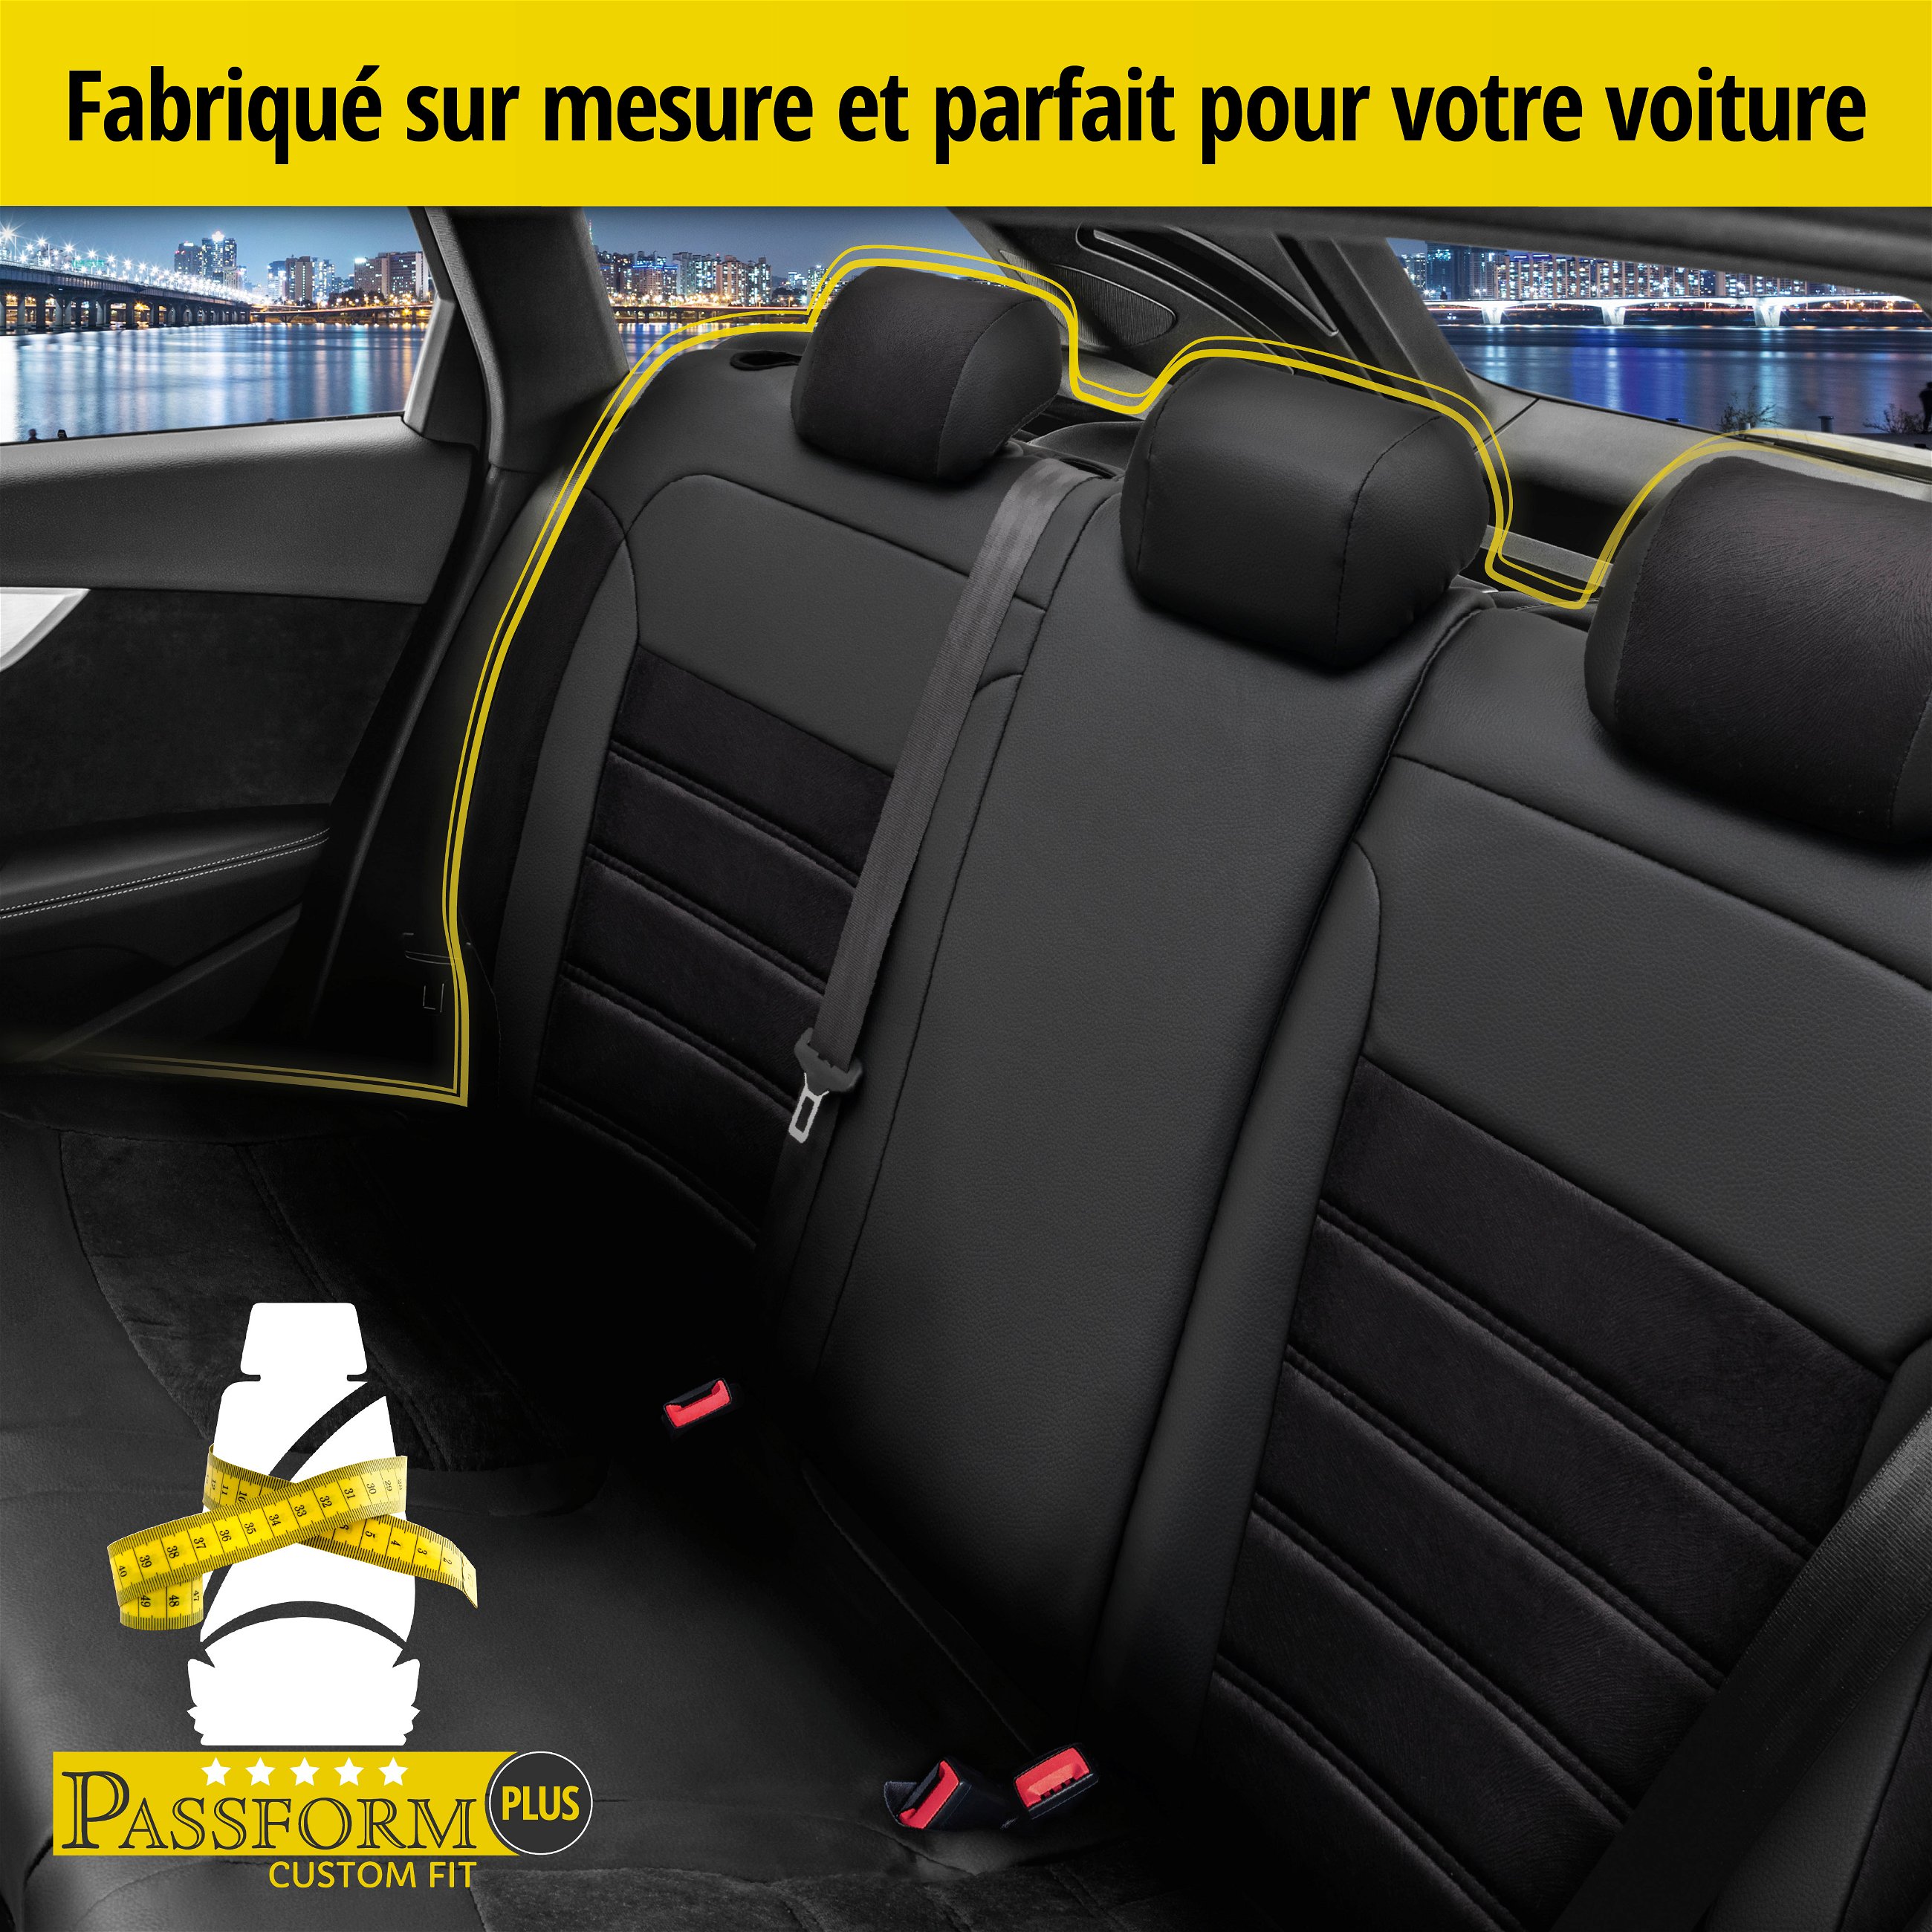 Housse de siège Bari pour Opel Astra H 01/2004-05/2014, Astra H notchback 02/2007-05/2014, 1 housse de siège arrière pour sièges normaux